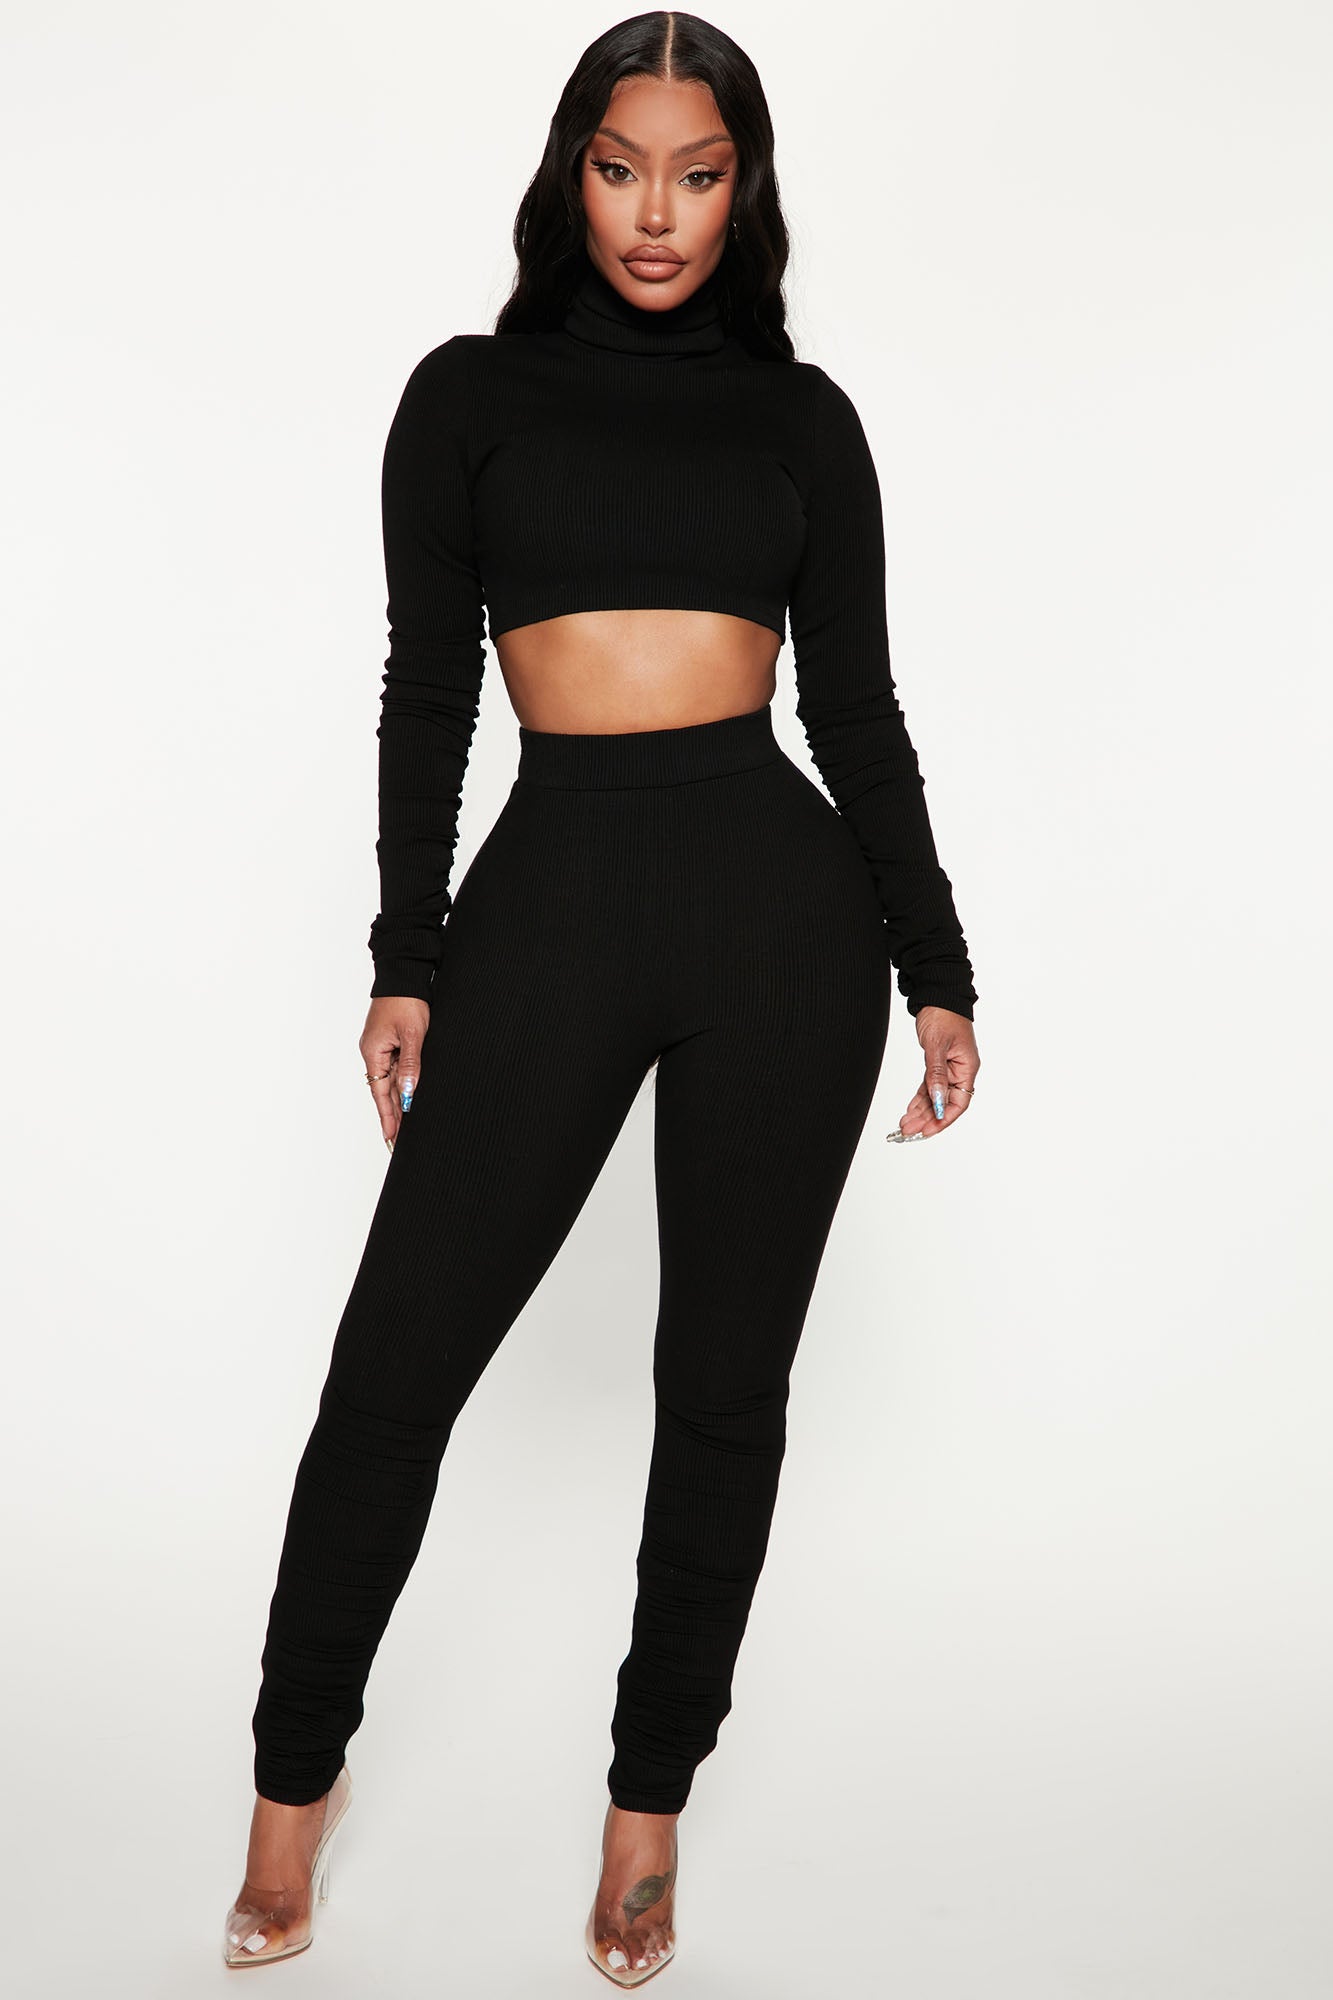 Basic Leggings – Snatched Fit Apparel